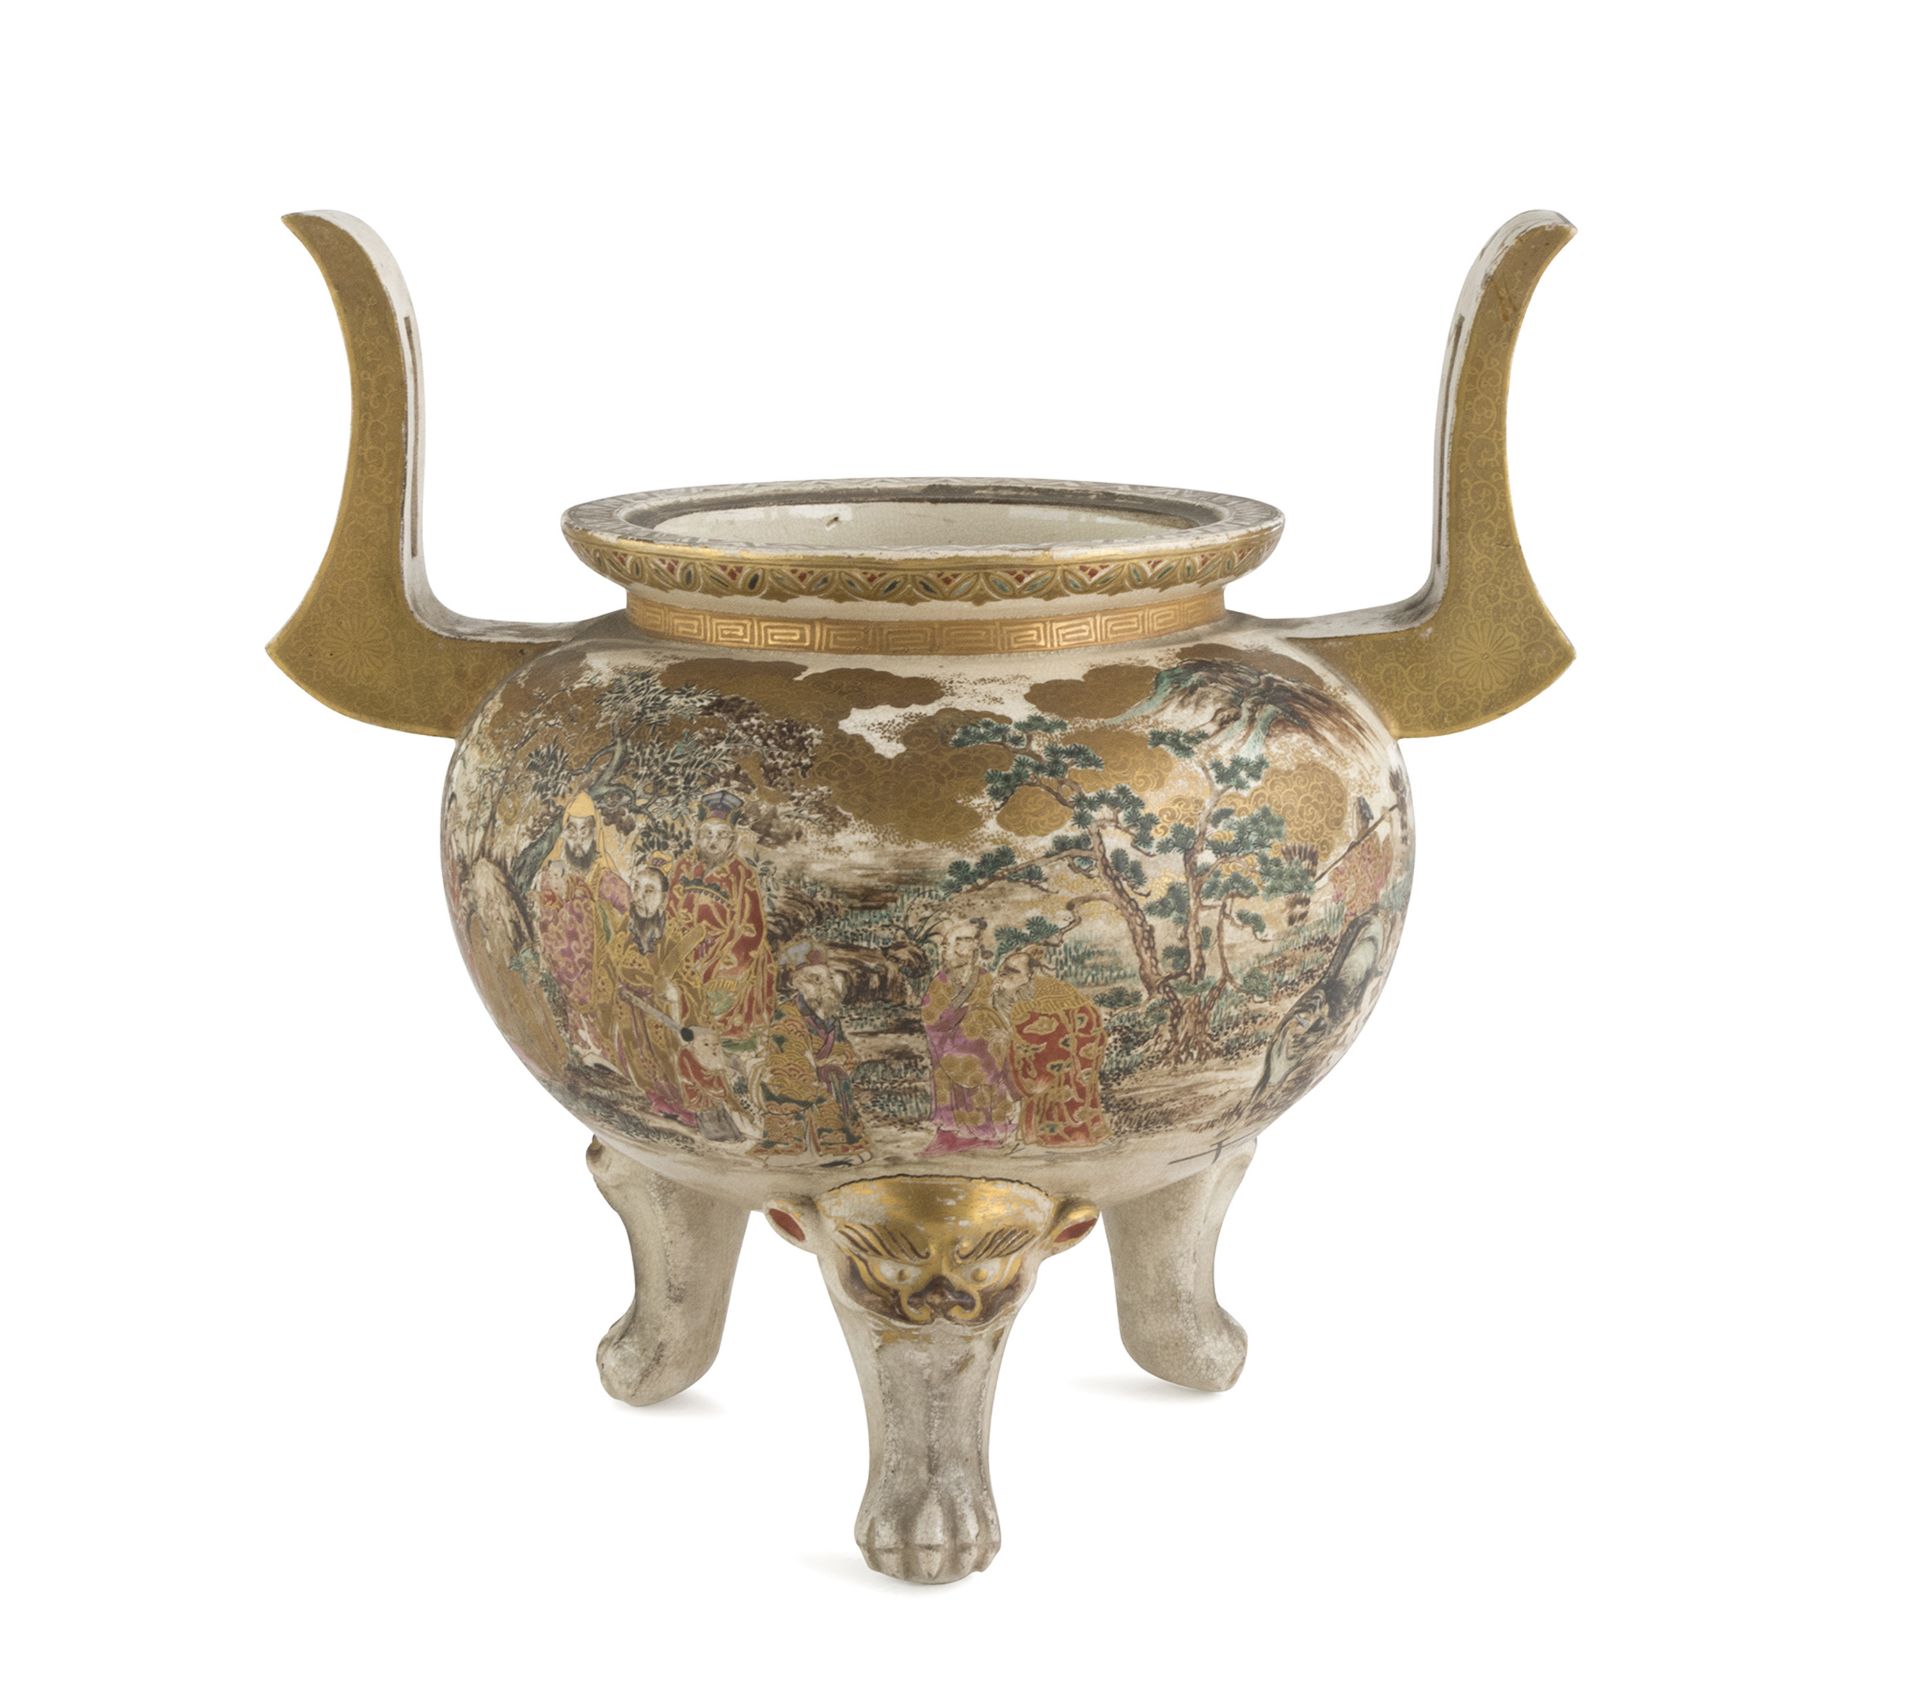 A JAPANESE POLYCHROME ENAMELED CENSER LATE 19TH EARLY 20TH CENTURY.